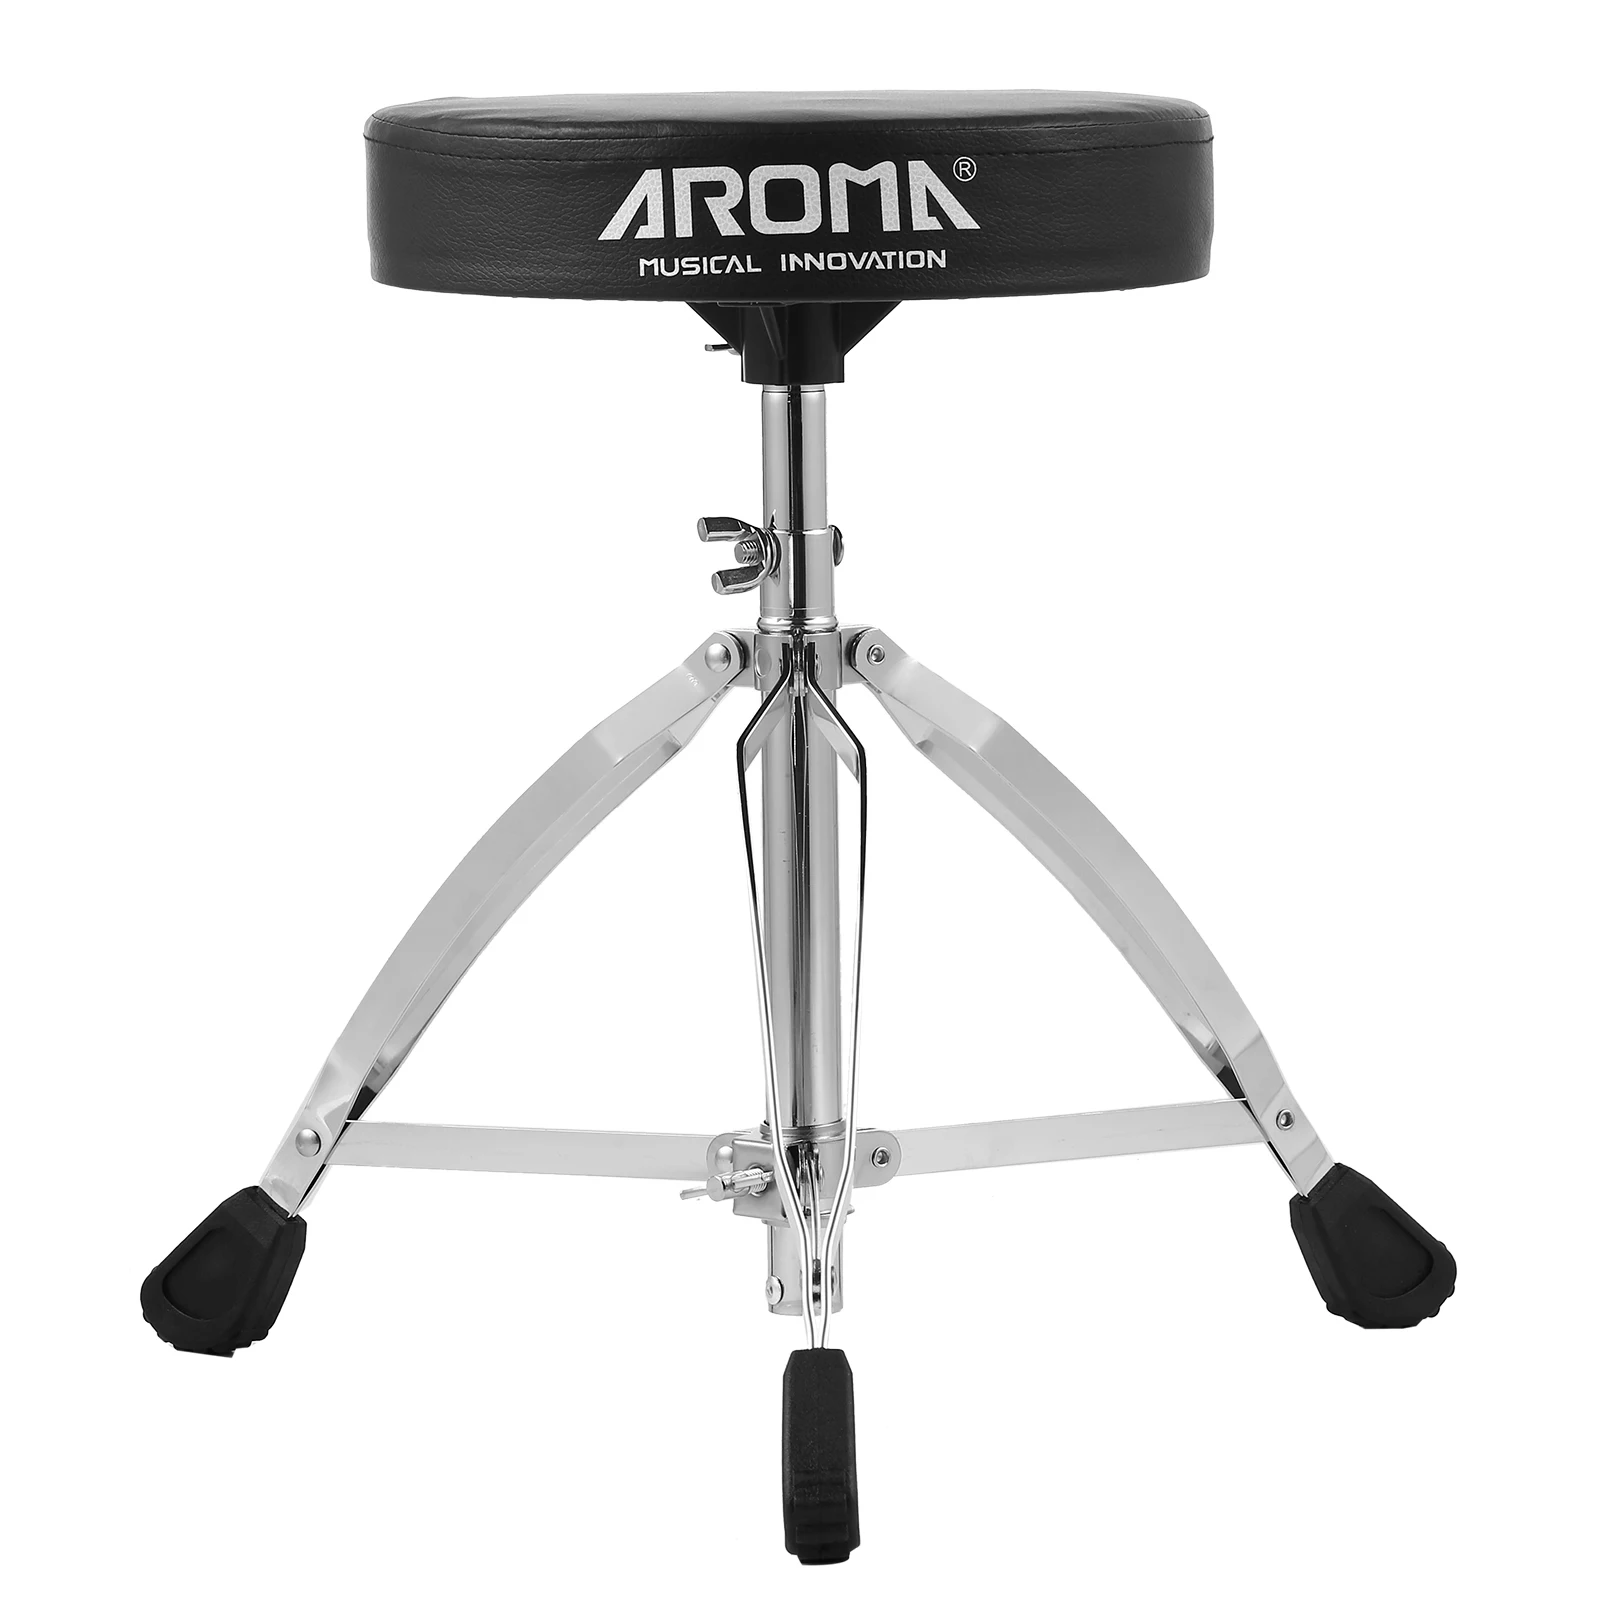 

Universal Drum Throne Round Drum Stool Double-braced Stainless Steel Legs Anti-slip 5 Level Adjustable Height for Adult Drummers